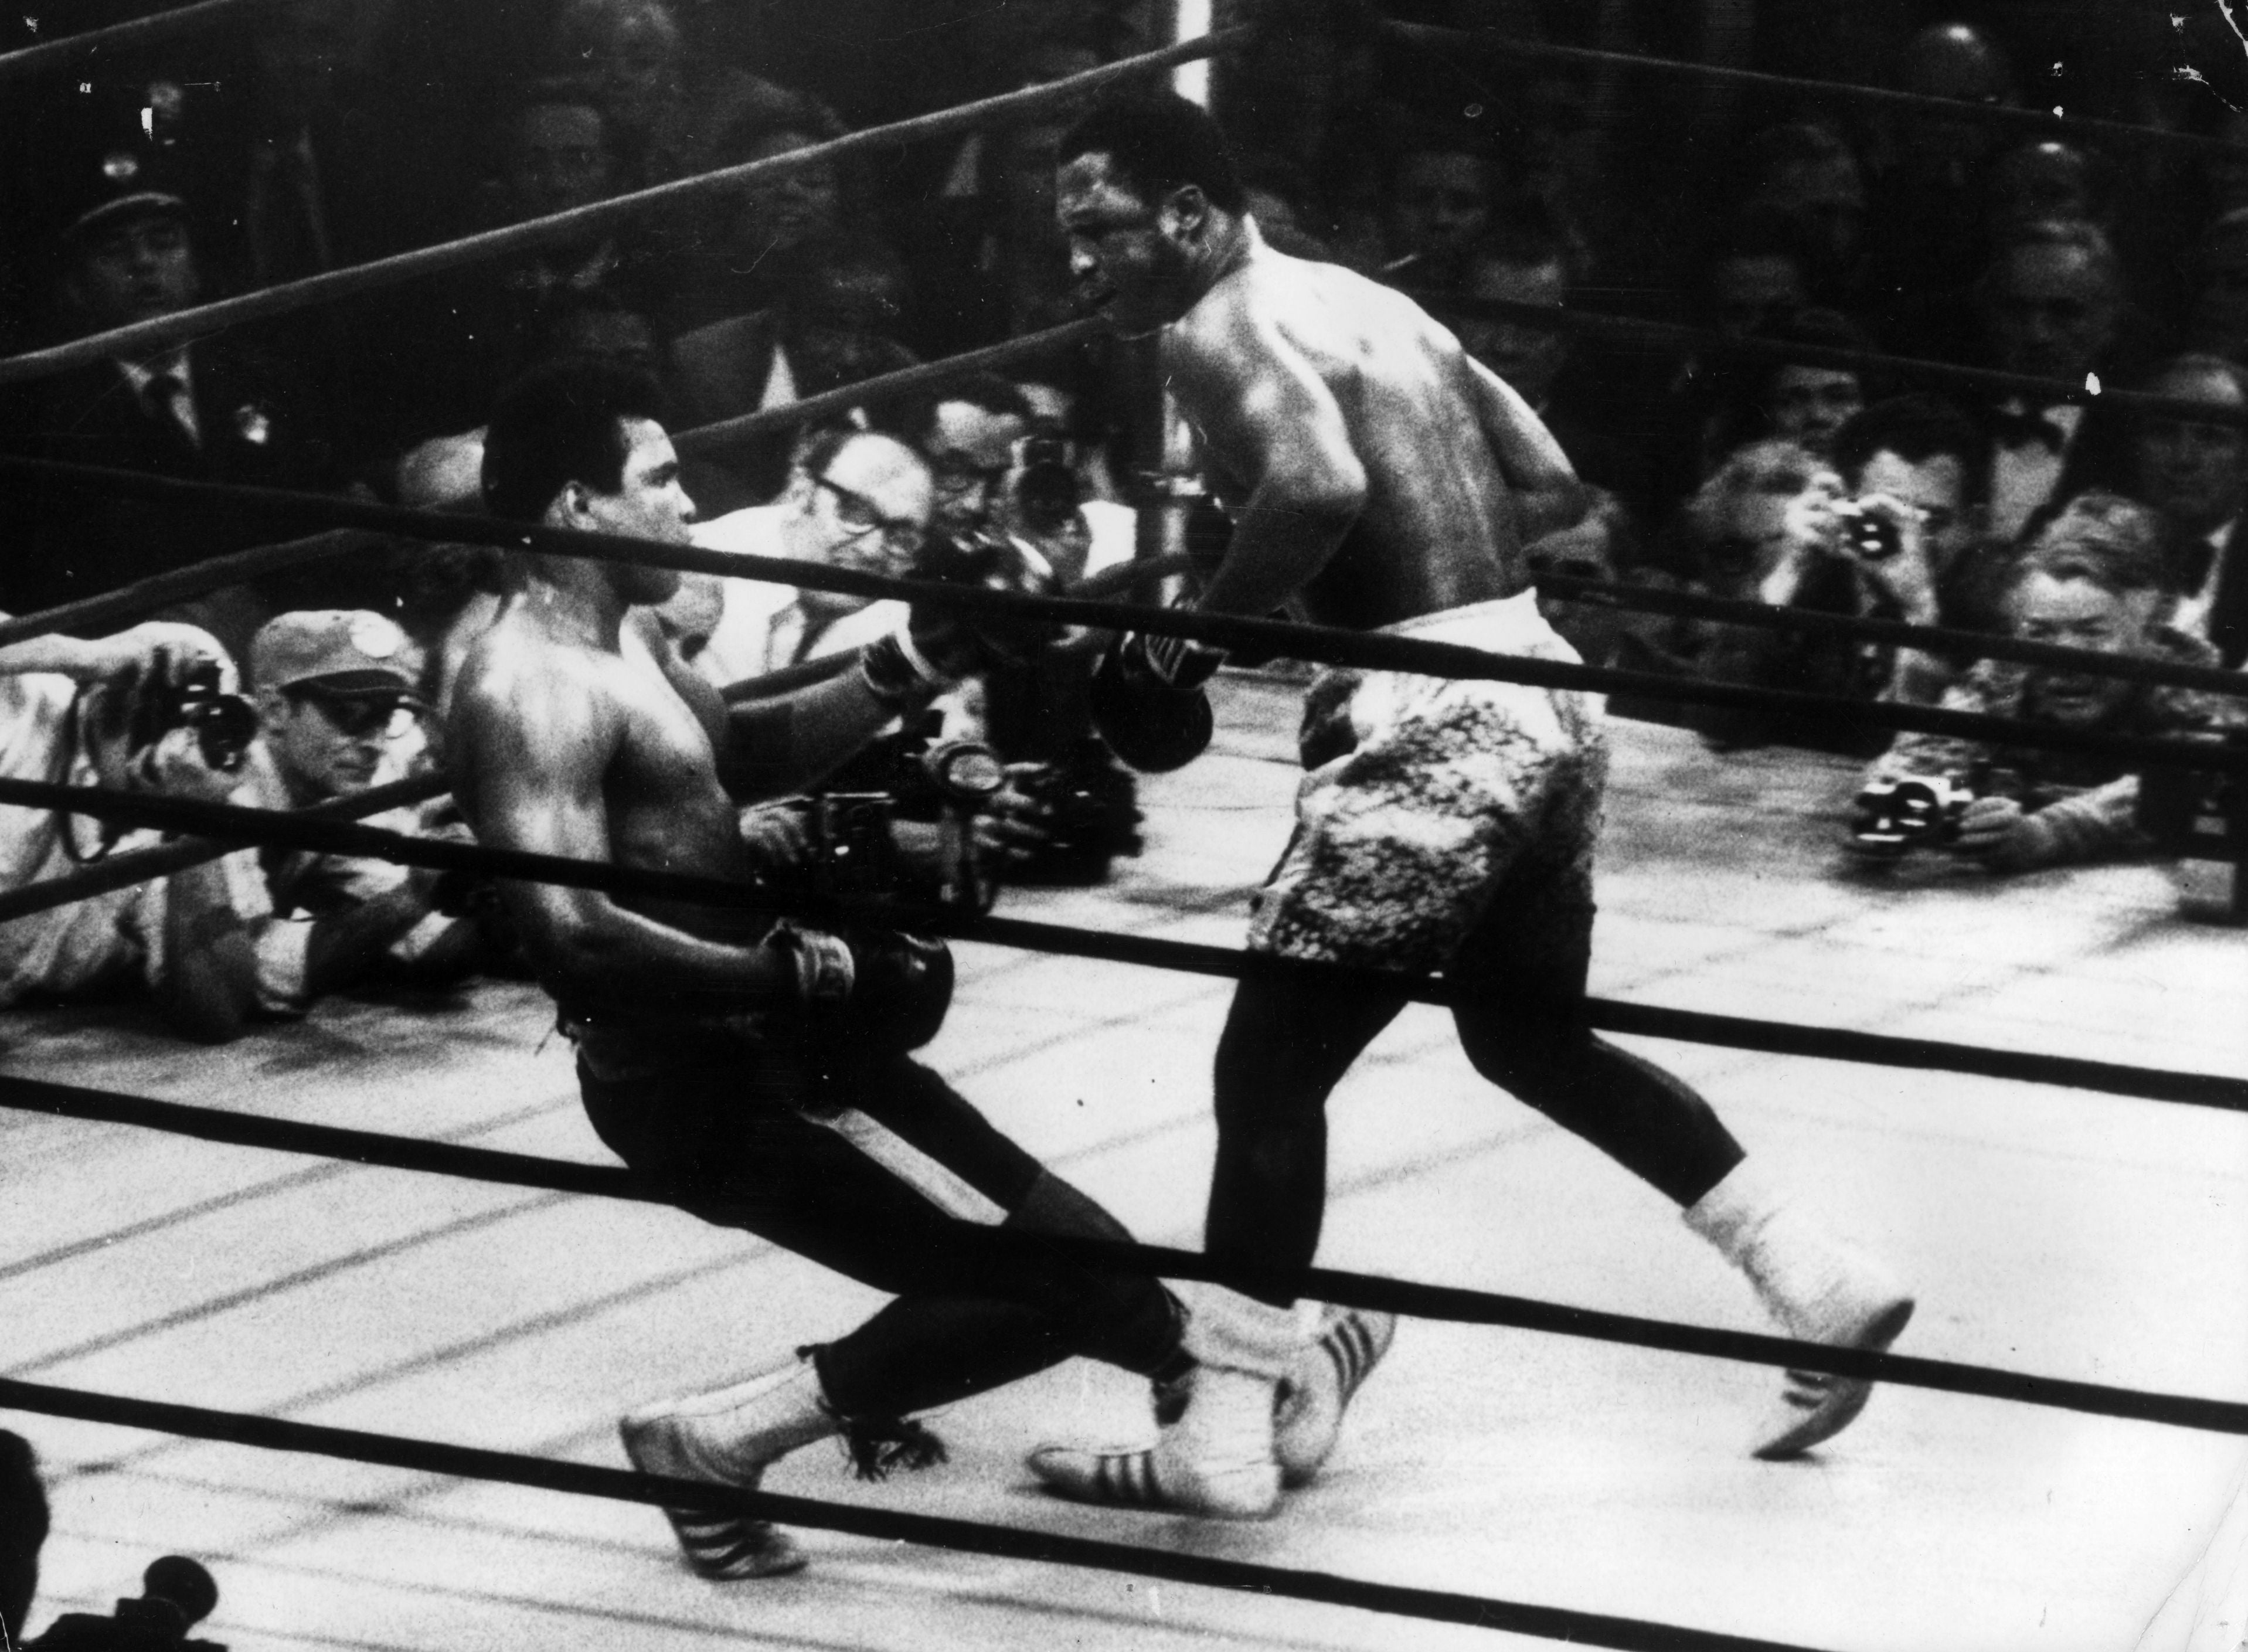 In a title fight at Madison Square Gardens, New York, Muhammad Ali goes down in the 15th round to a left hook from world heavyweight champion Joe Frazier who kept the title with an unanimous points win.